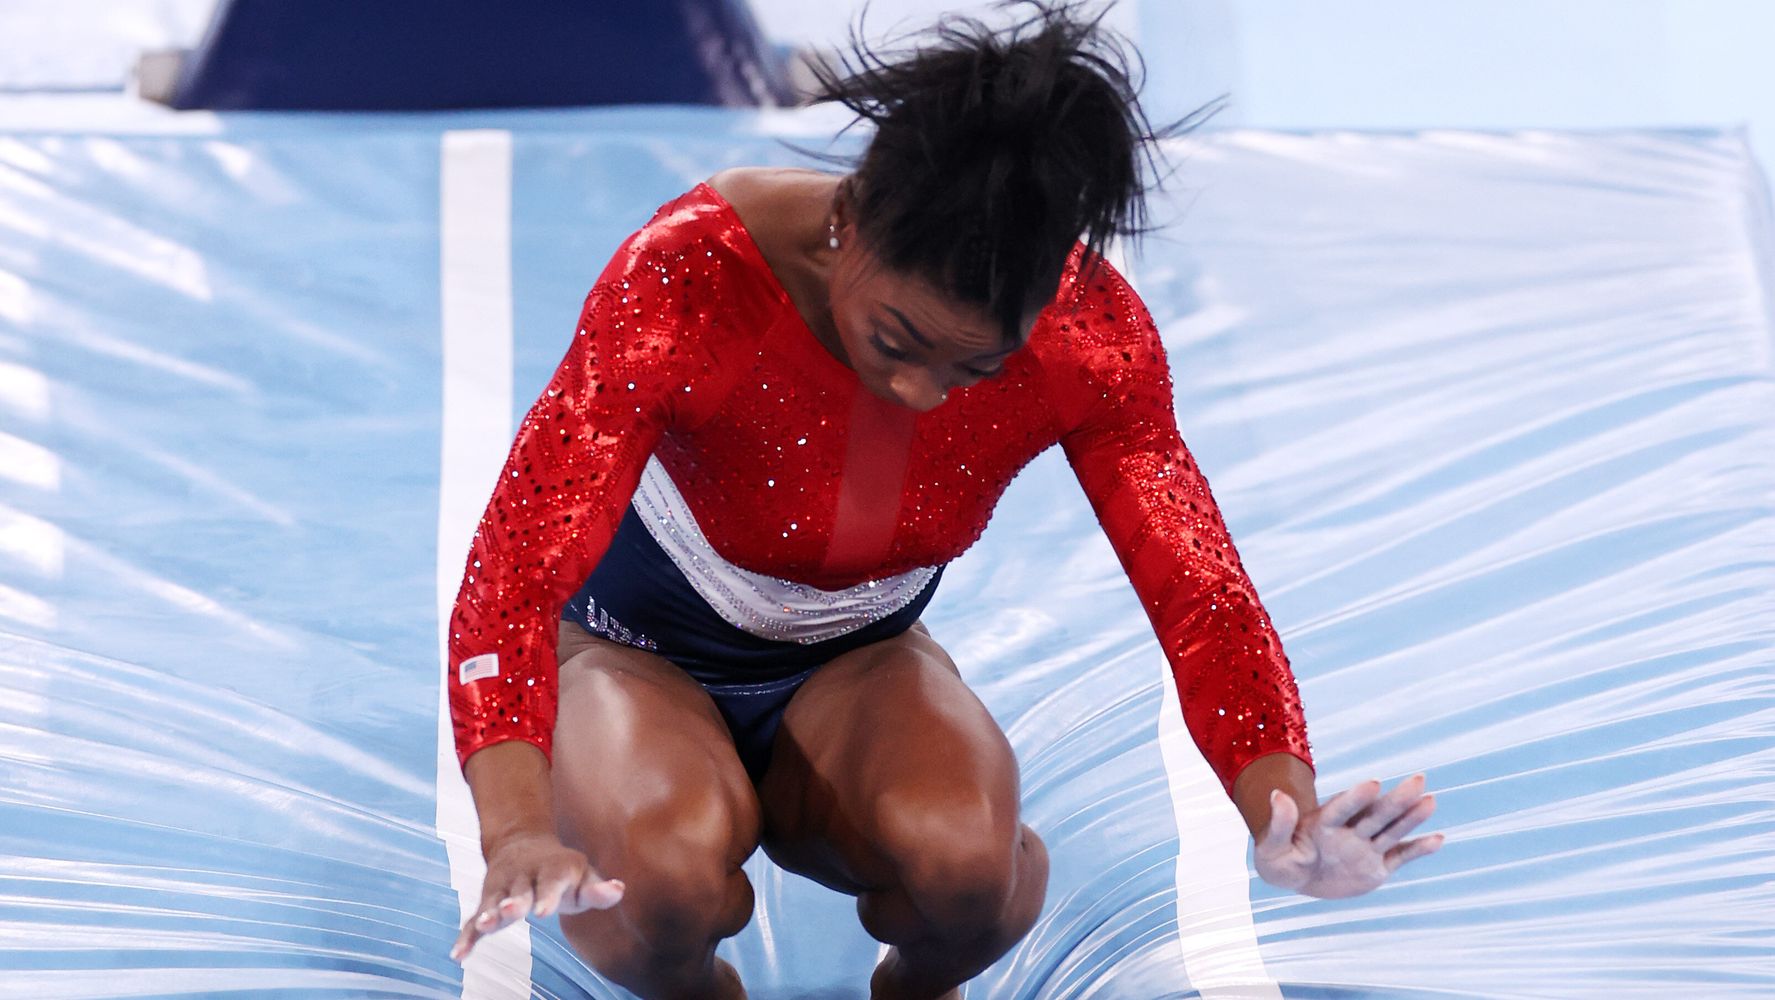 Simone Biles Falters On Vault, Pulls Out Of Gymnastics Team Final With Apparent Injury